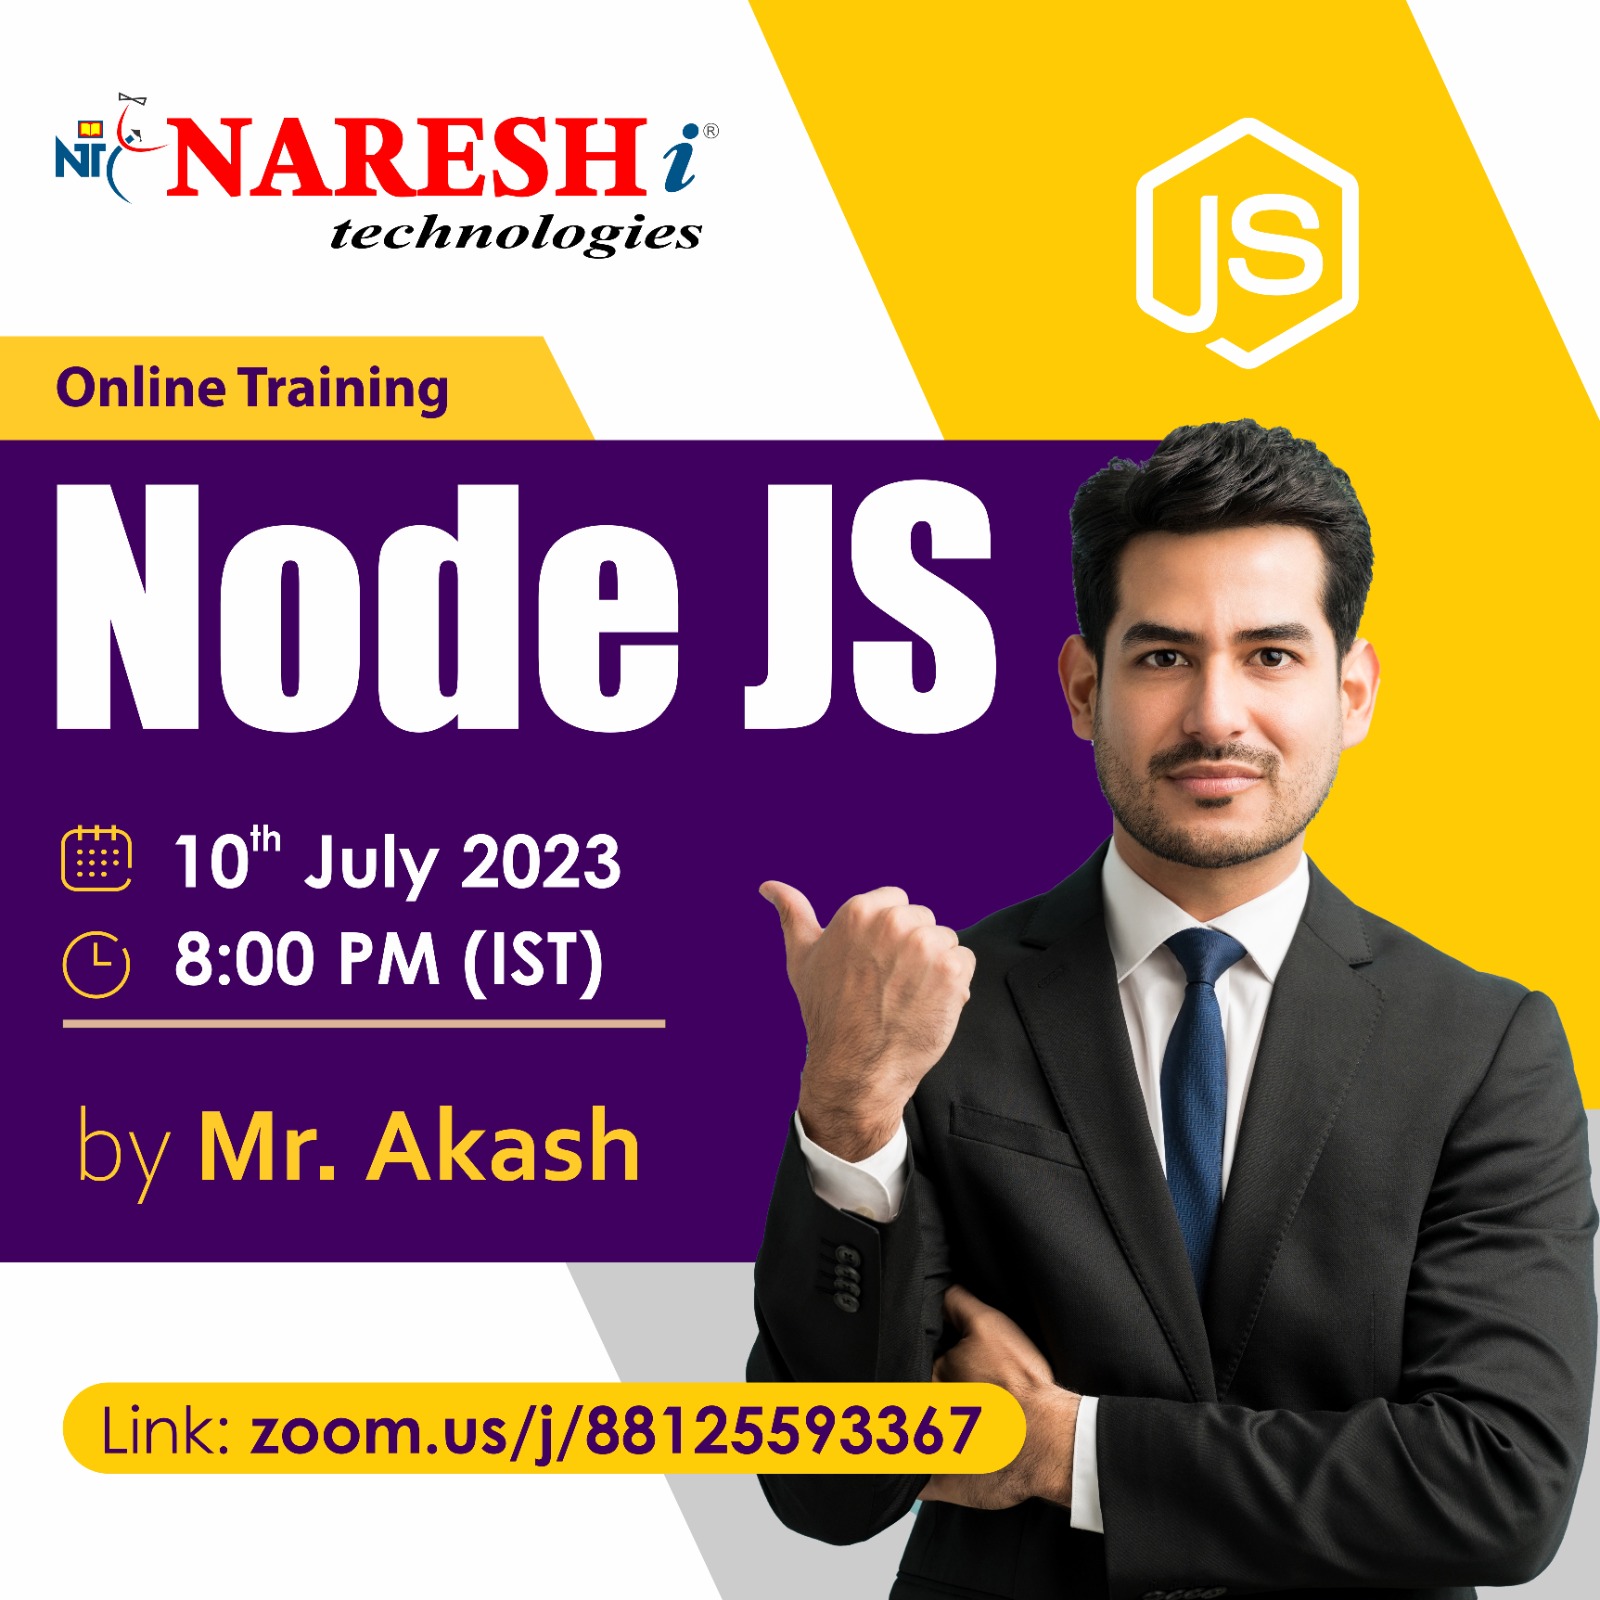 Attend a Free Demo On Node JS by Mr. Aakash - NareshIT, Online Event